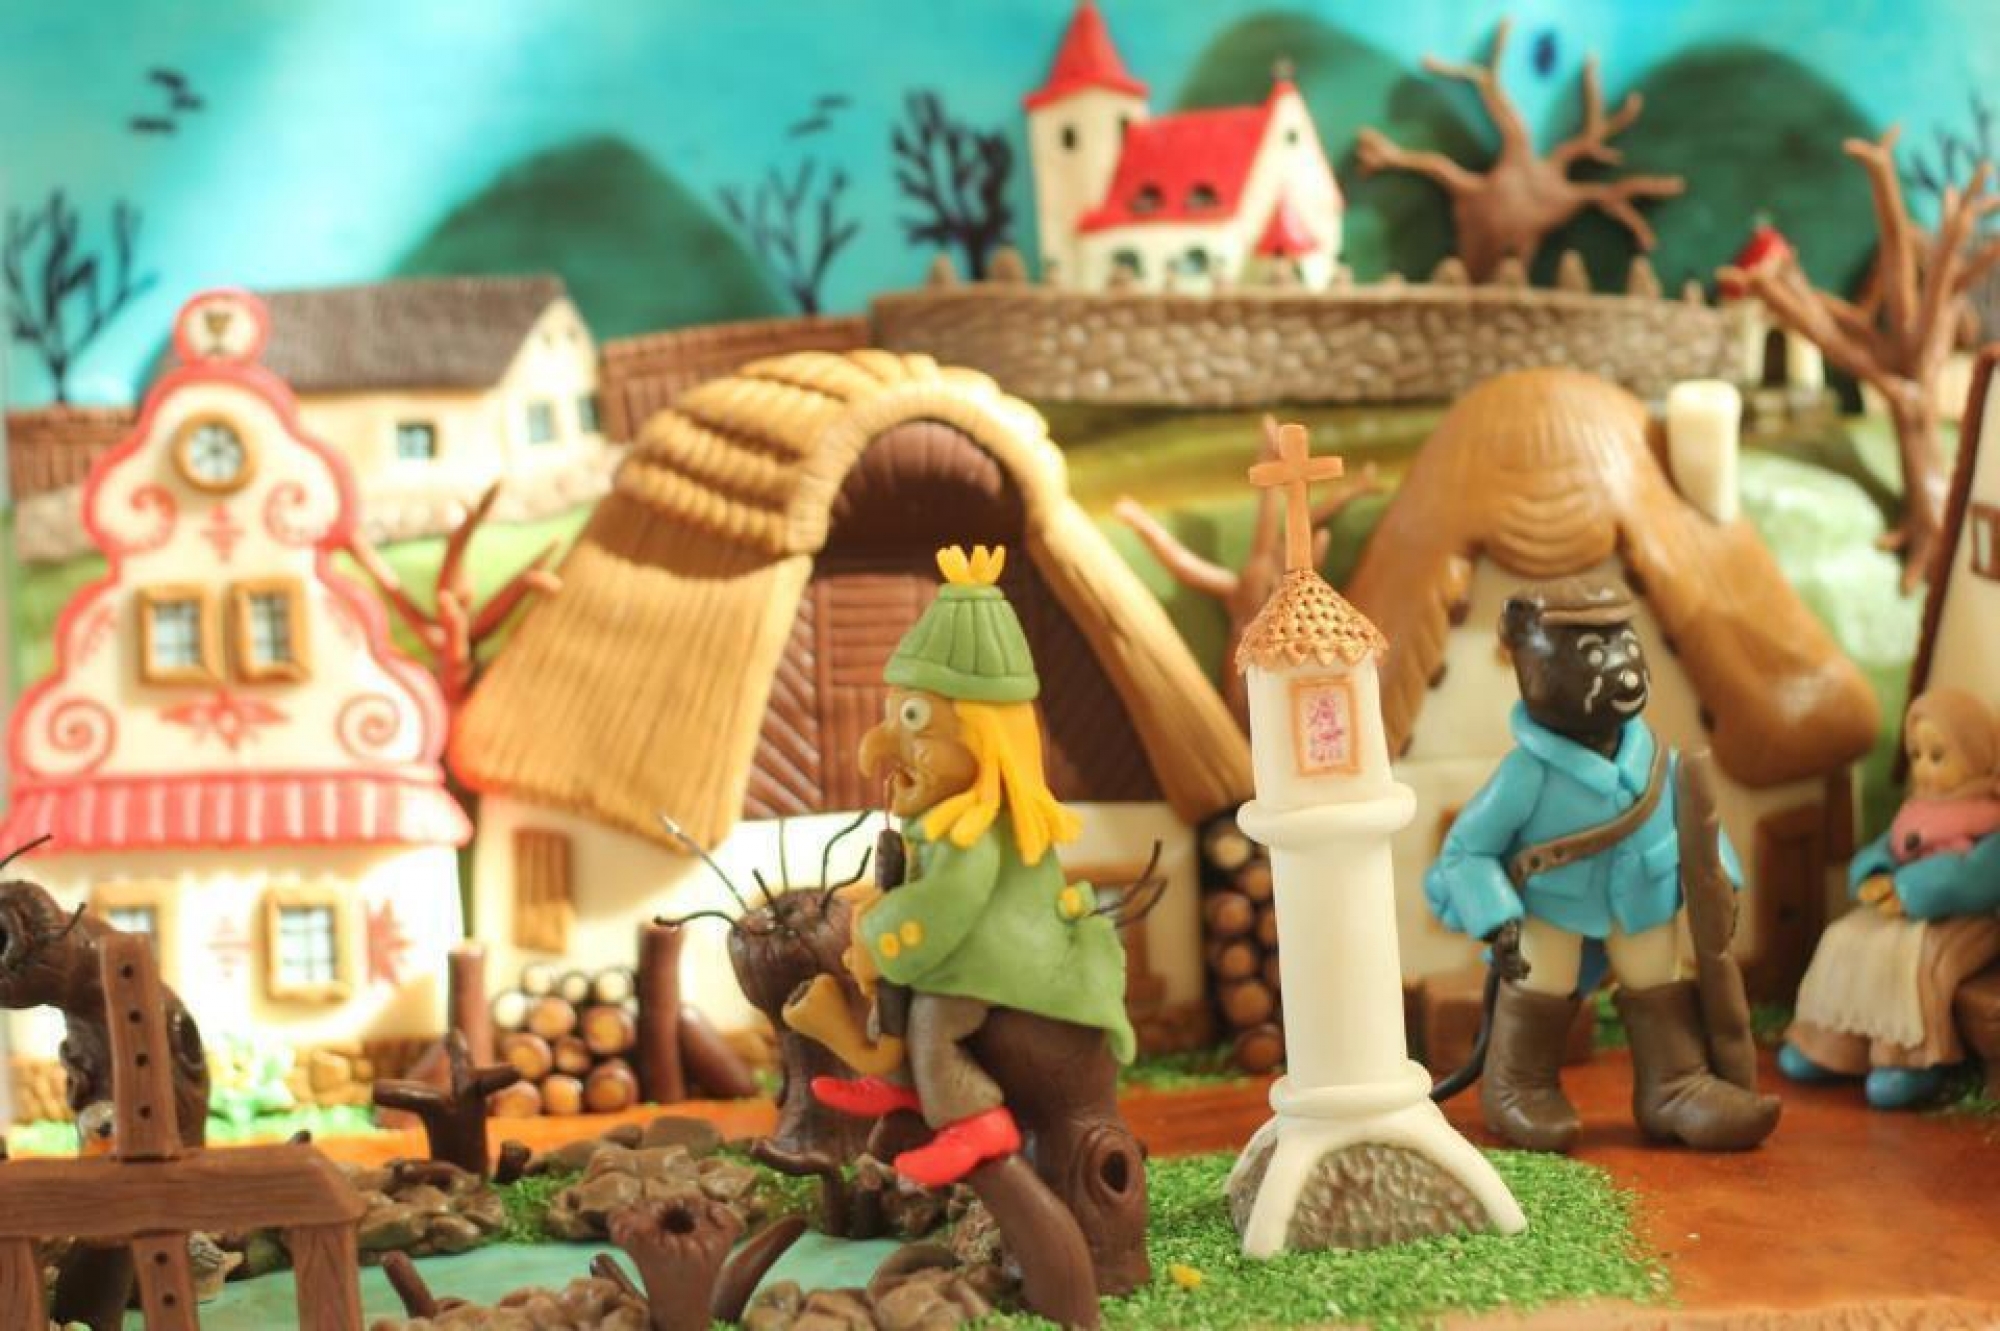 Museum of Chocolate and Marzipan